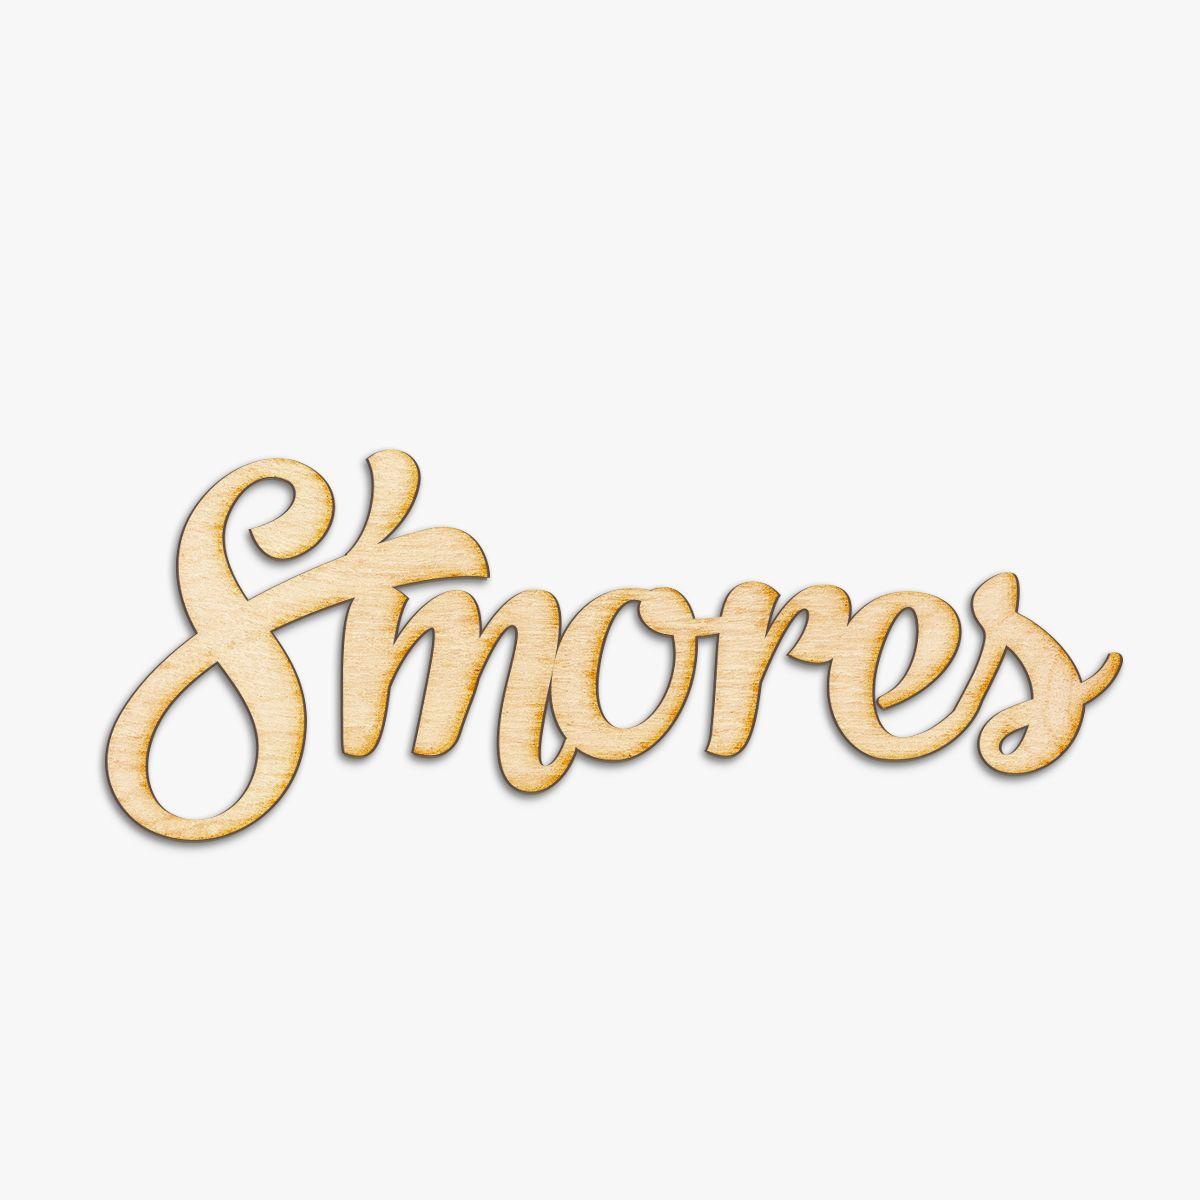 S'mores Logo - S'mores Wood Cut Sign